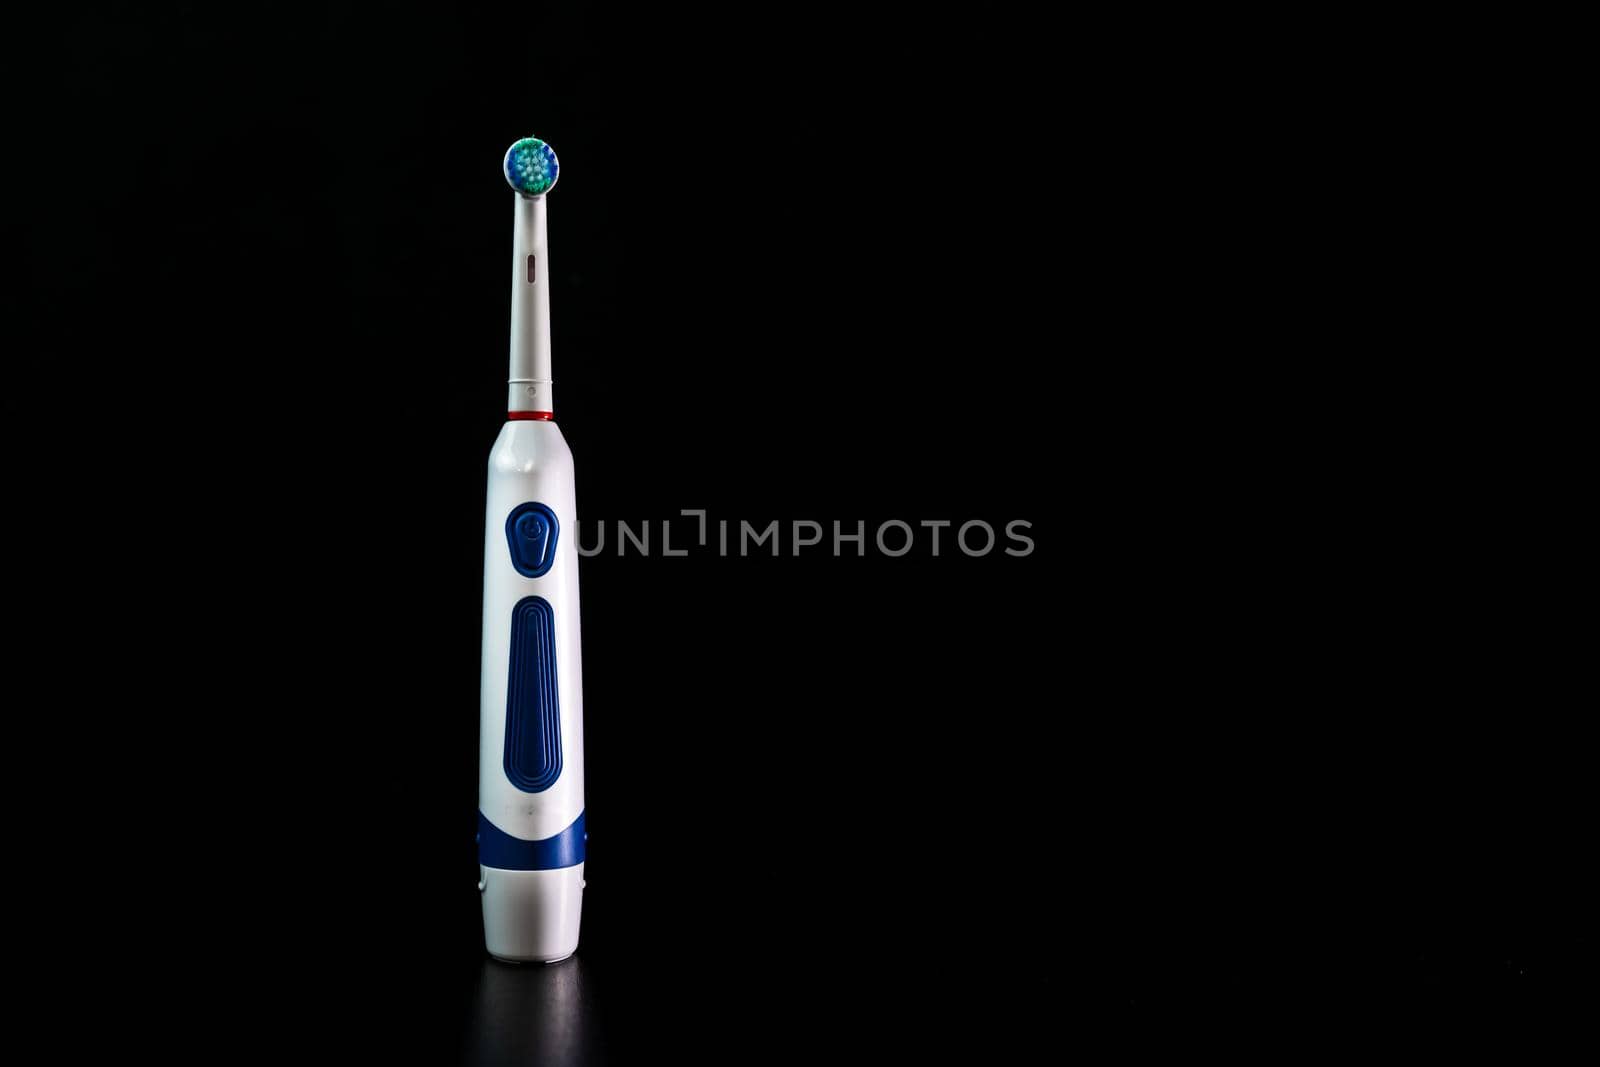 Close up of electric toothbrush isolated on black background.